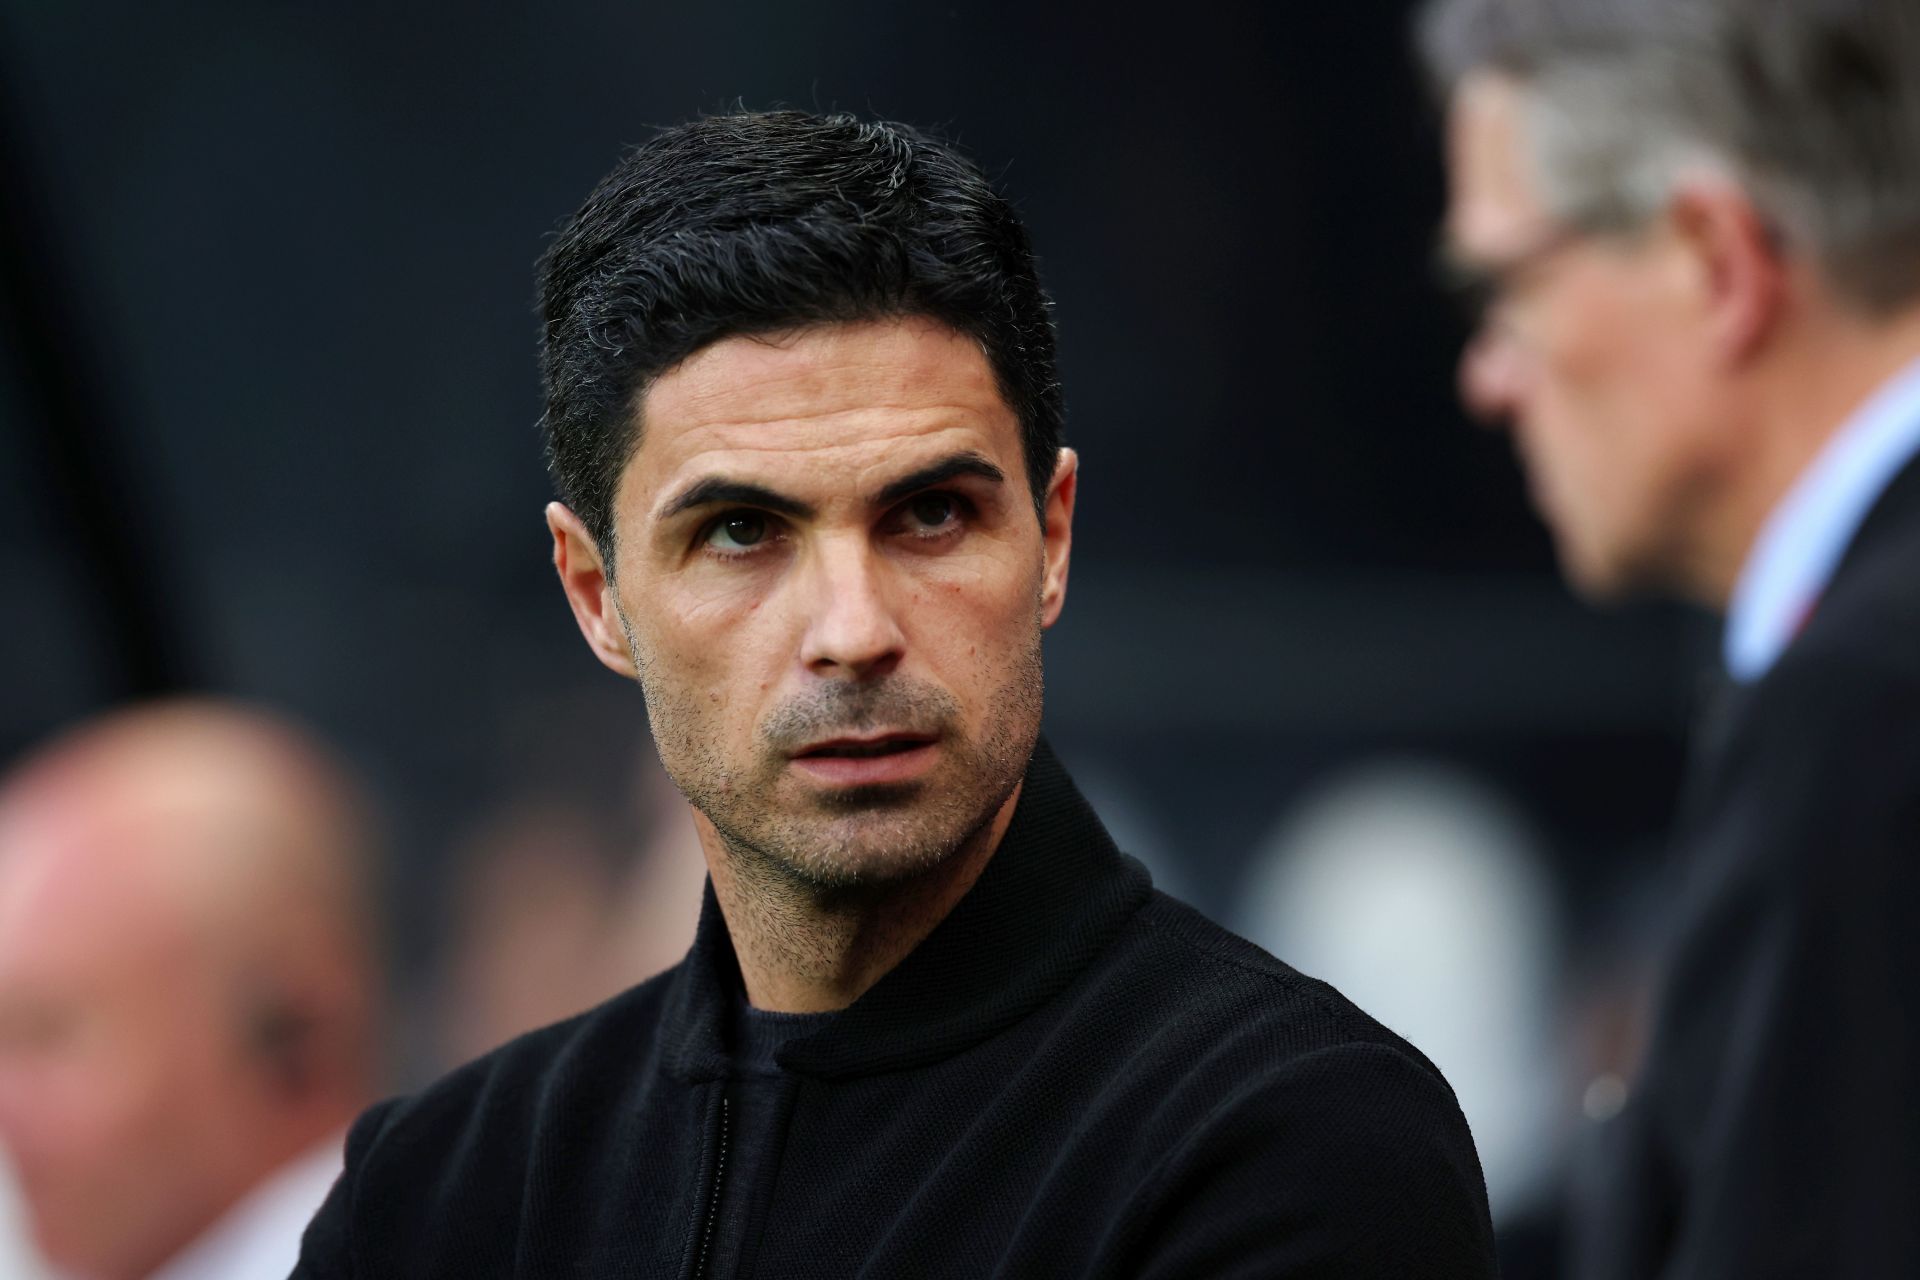 Mikel Arteta is looking to build a winning team at the Emirates